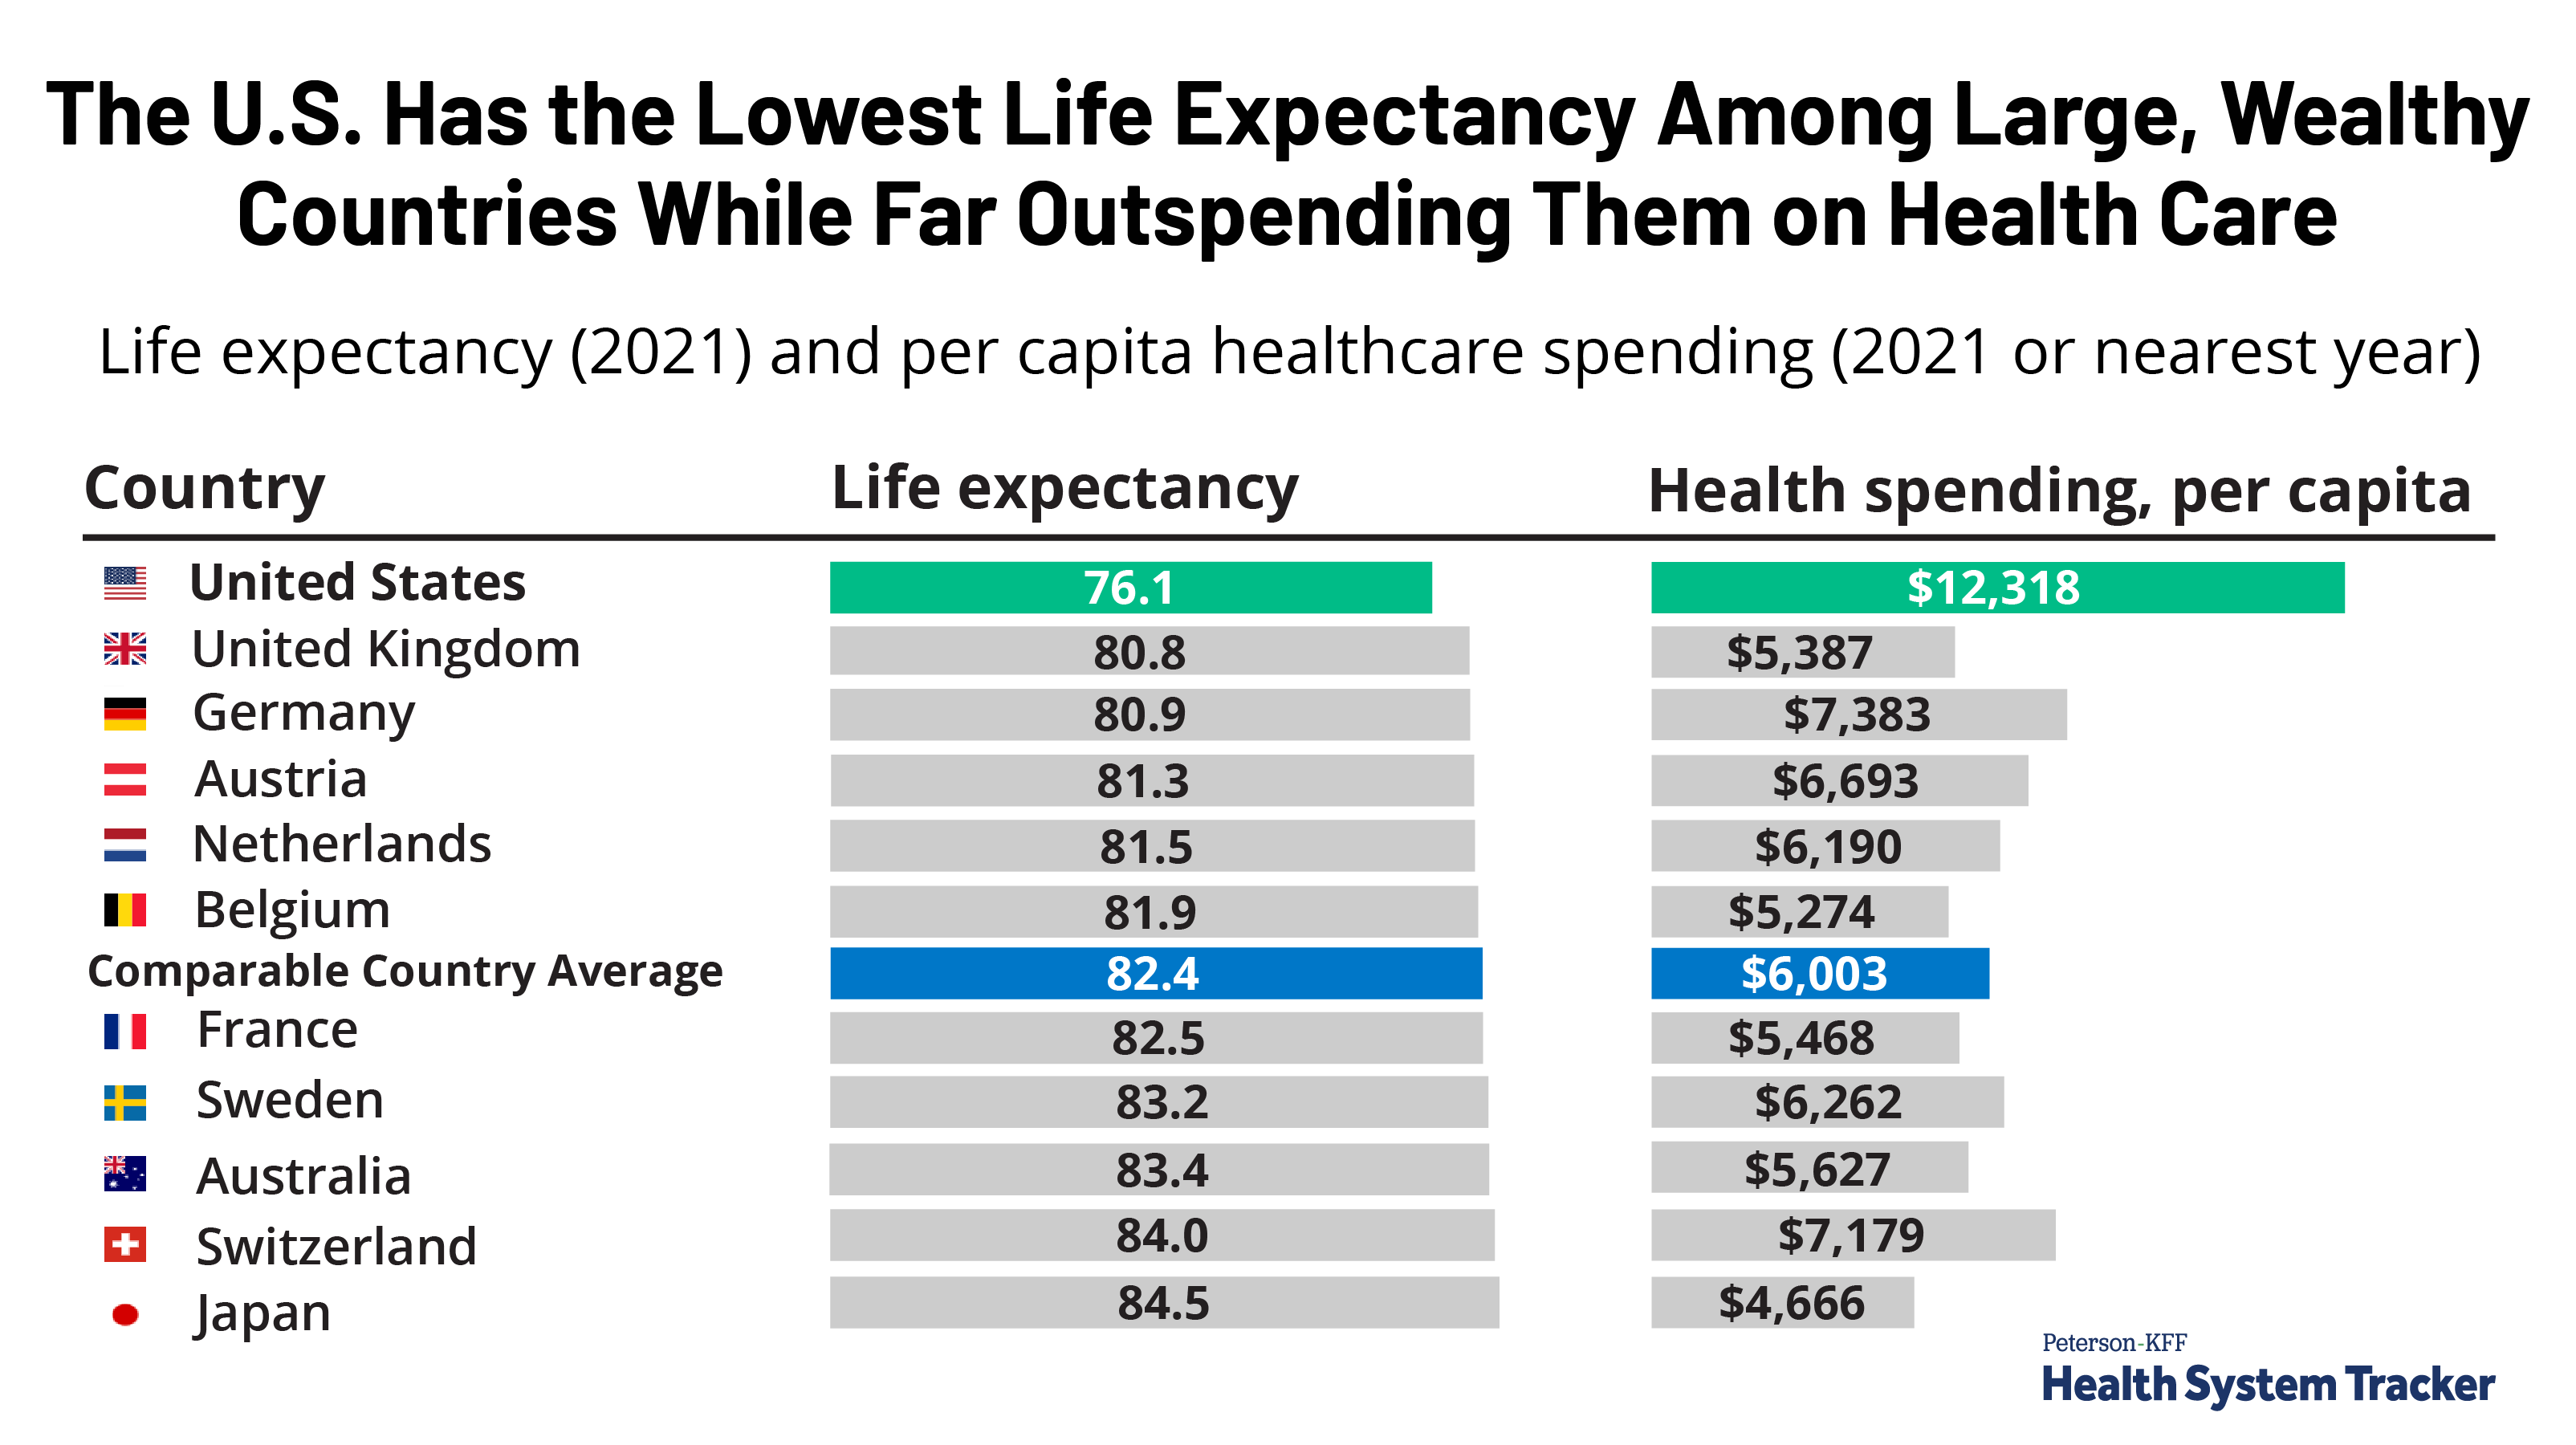 The U.S. Has the Lowest Life Expectancy Among Large, Wealthy Countries